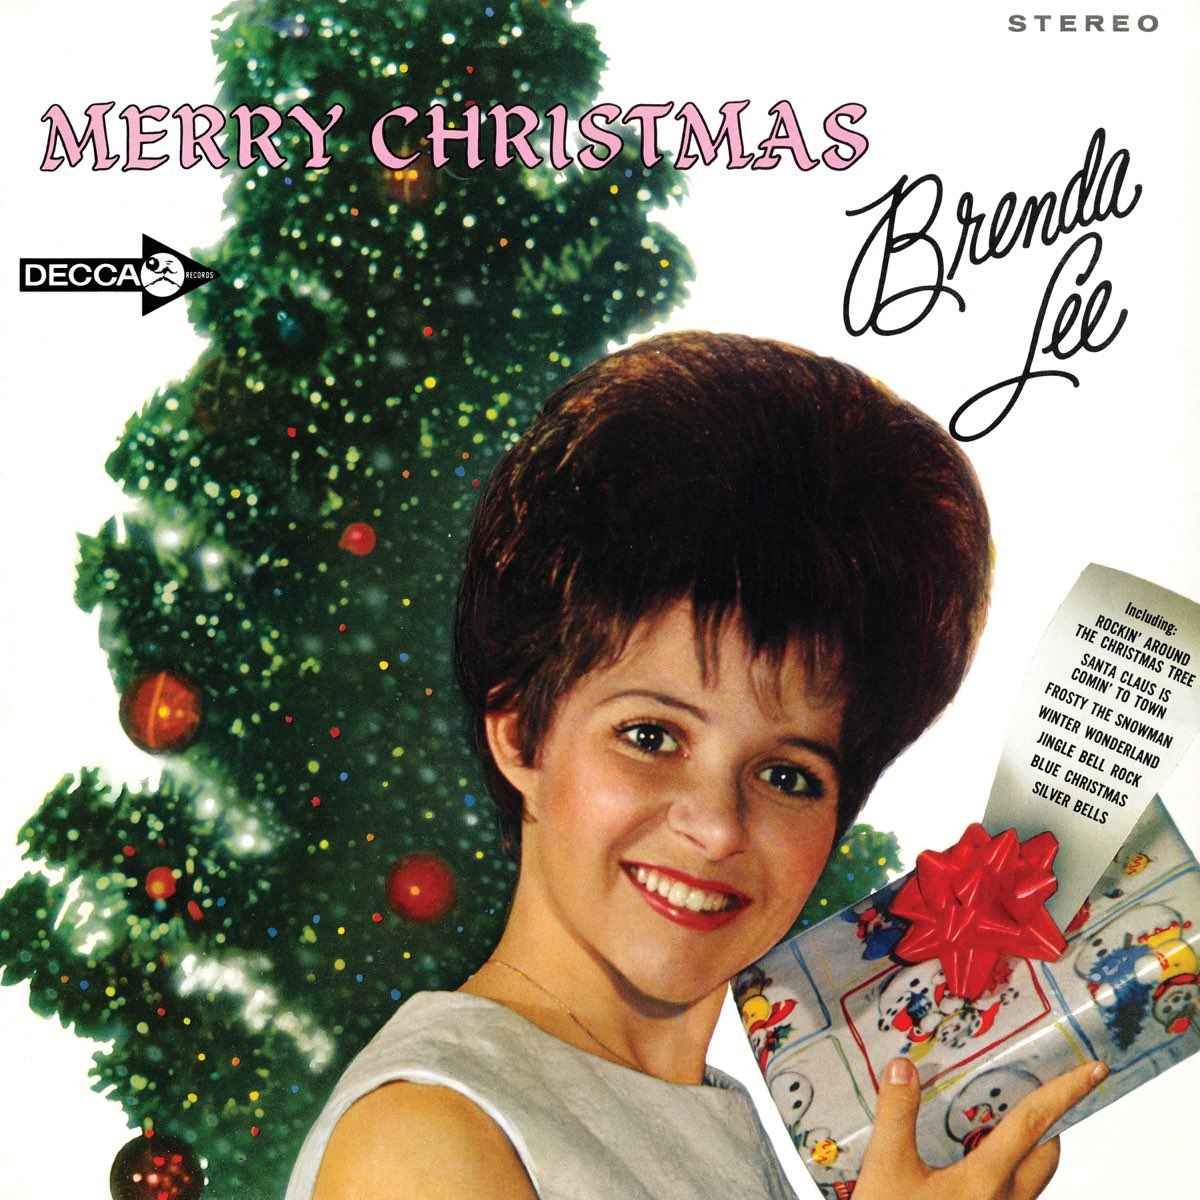 Brenda Lee’s “Rockin Around The Christmas Tree” returns to #1 on US iTunes for the first time since December 2020.